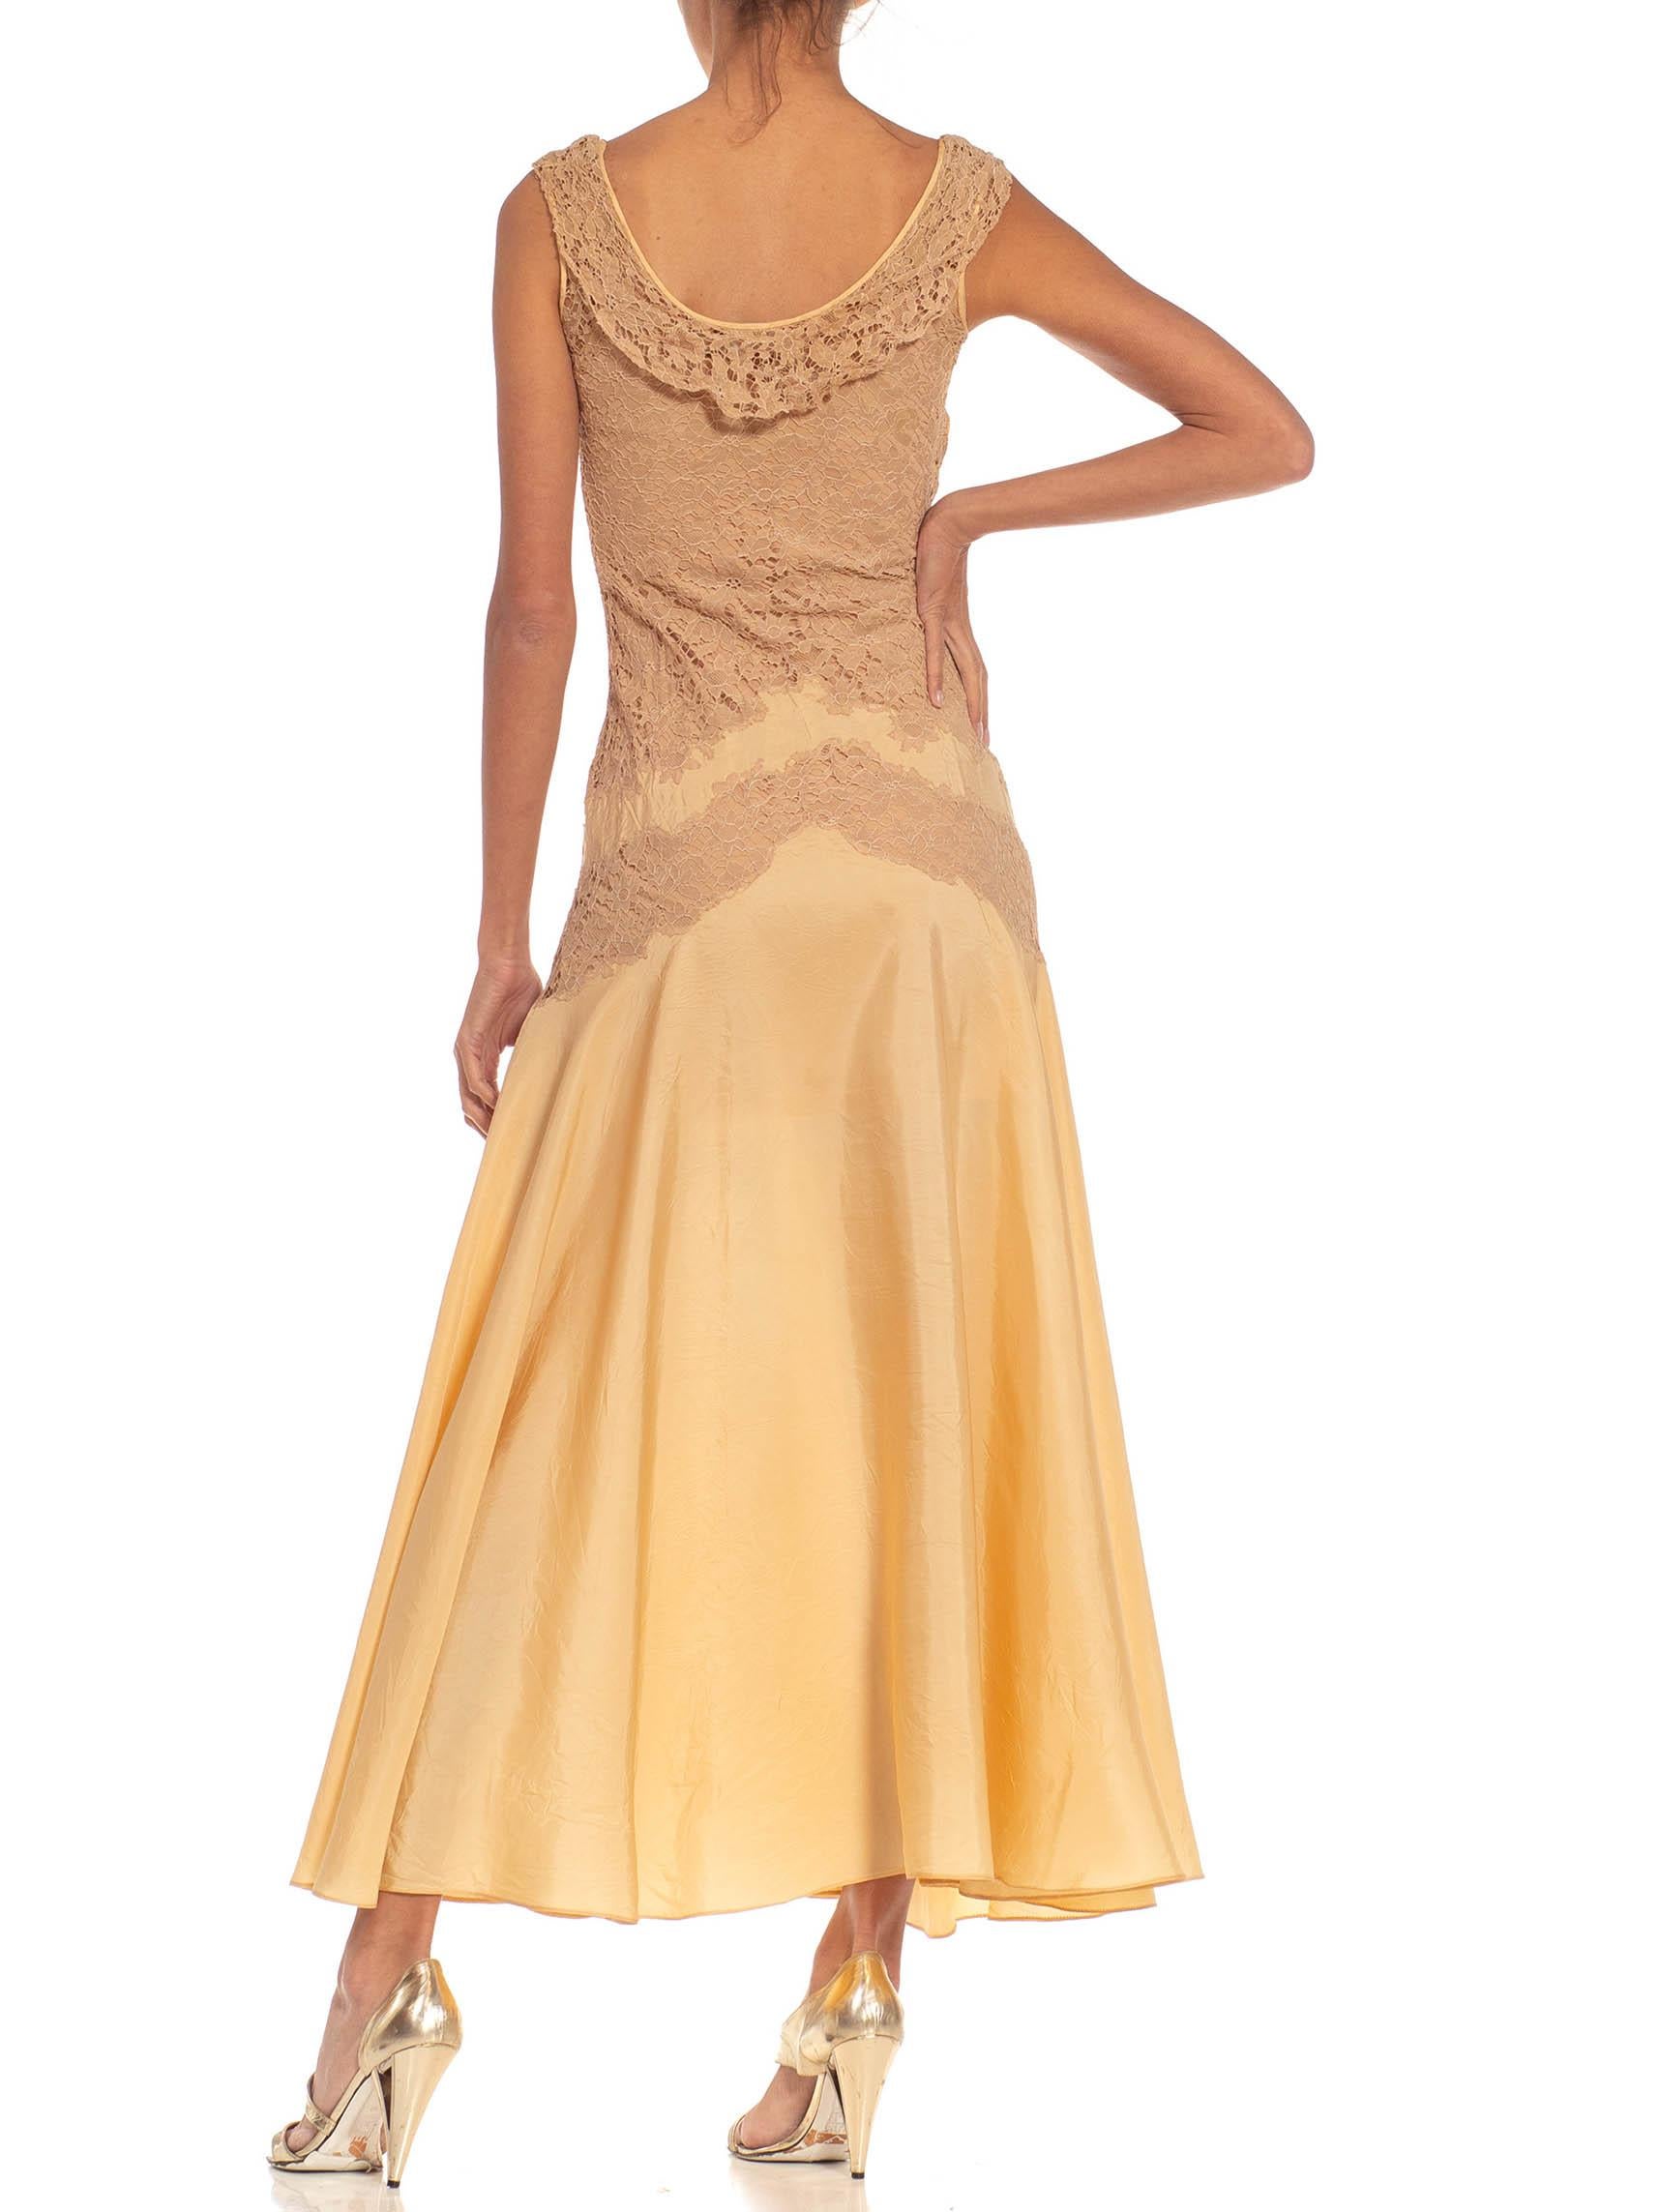 1930S Beige & Yellow Gold Chiffon Lace Slip Dress In Excellent Condition For Sale In New York, NY